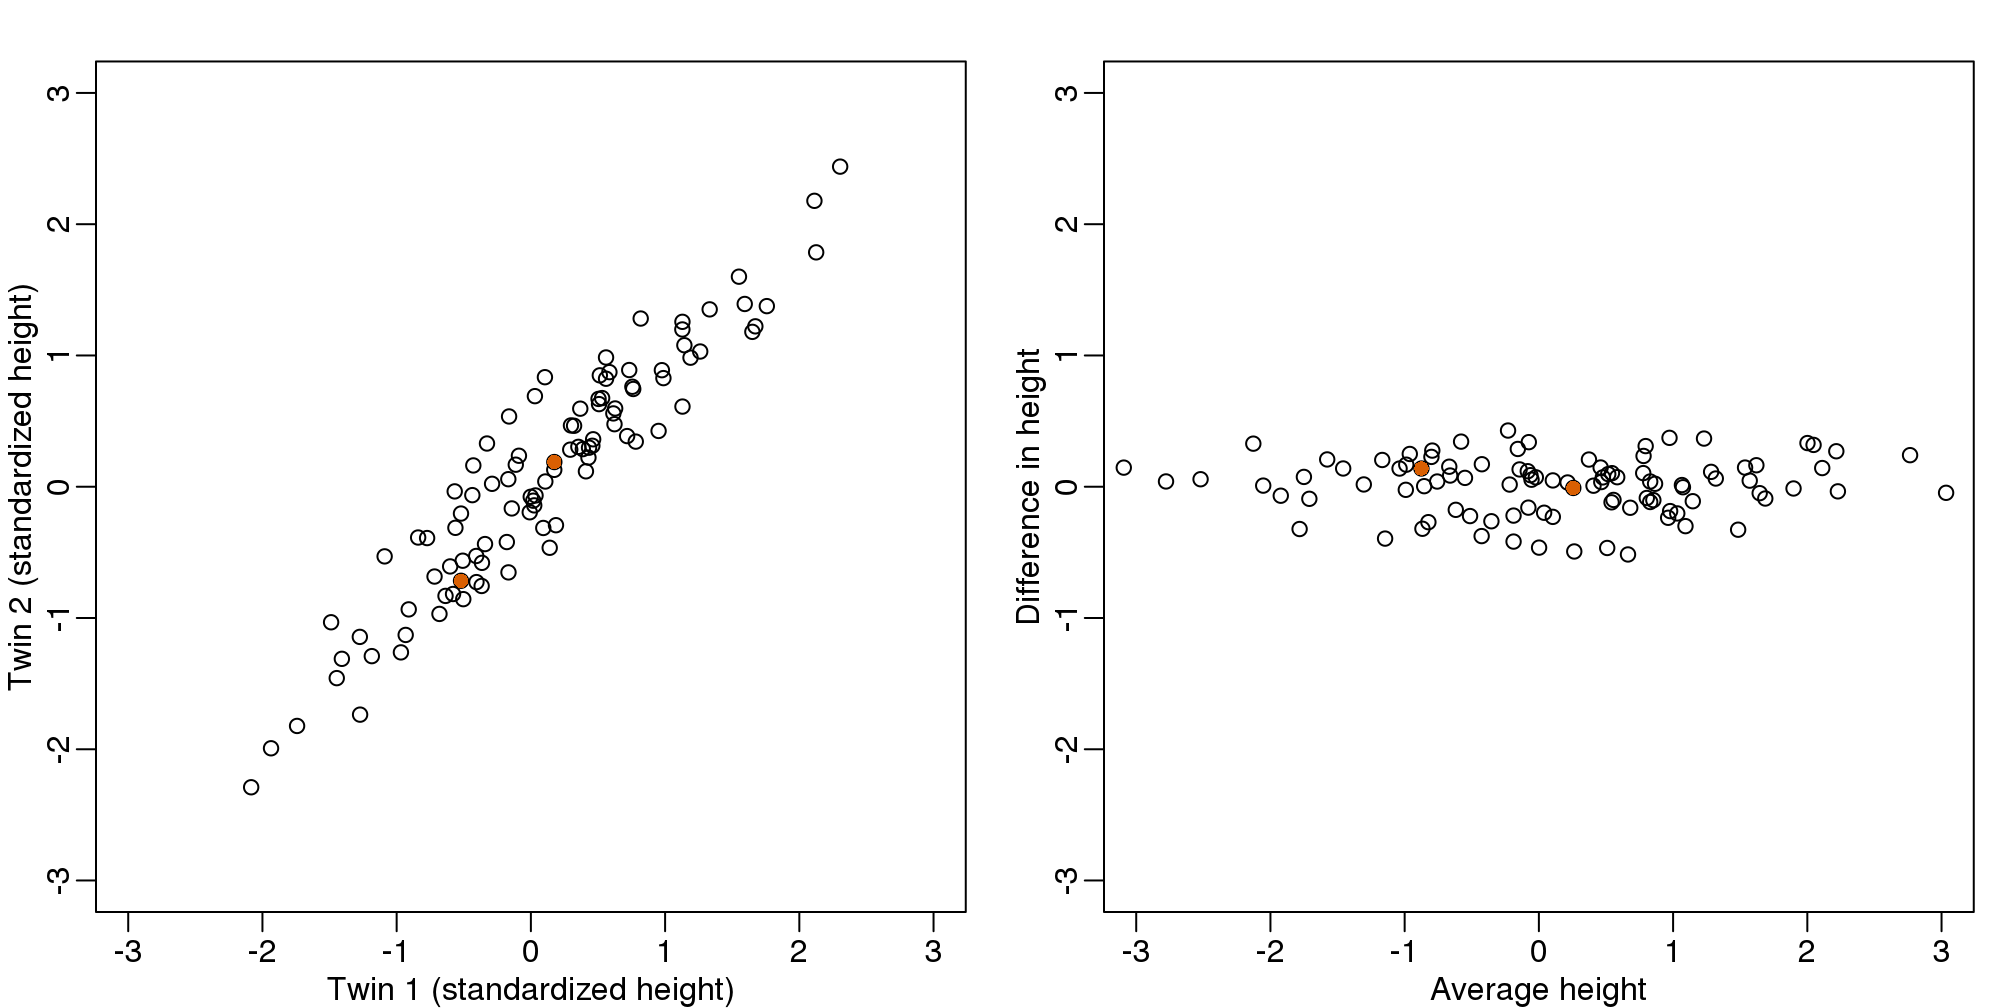 Twin height scatterplot (left) and after rotation (right).